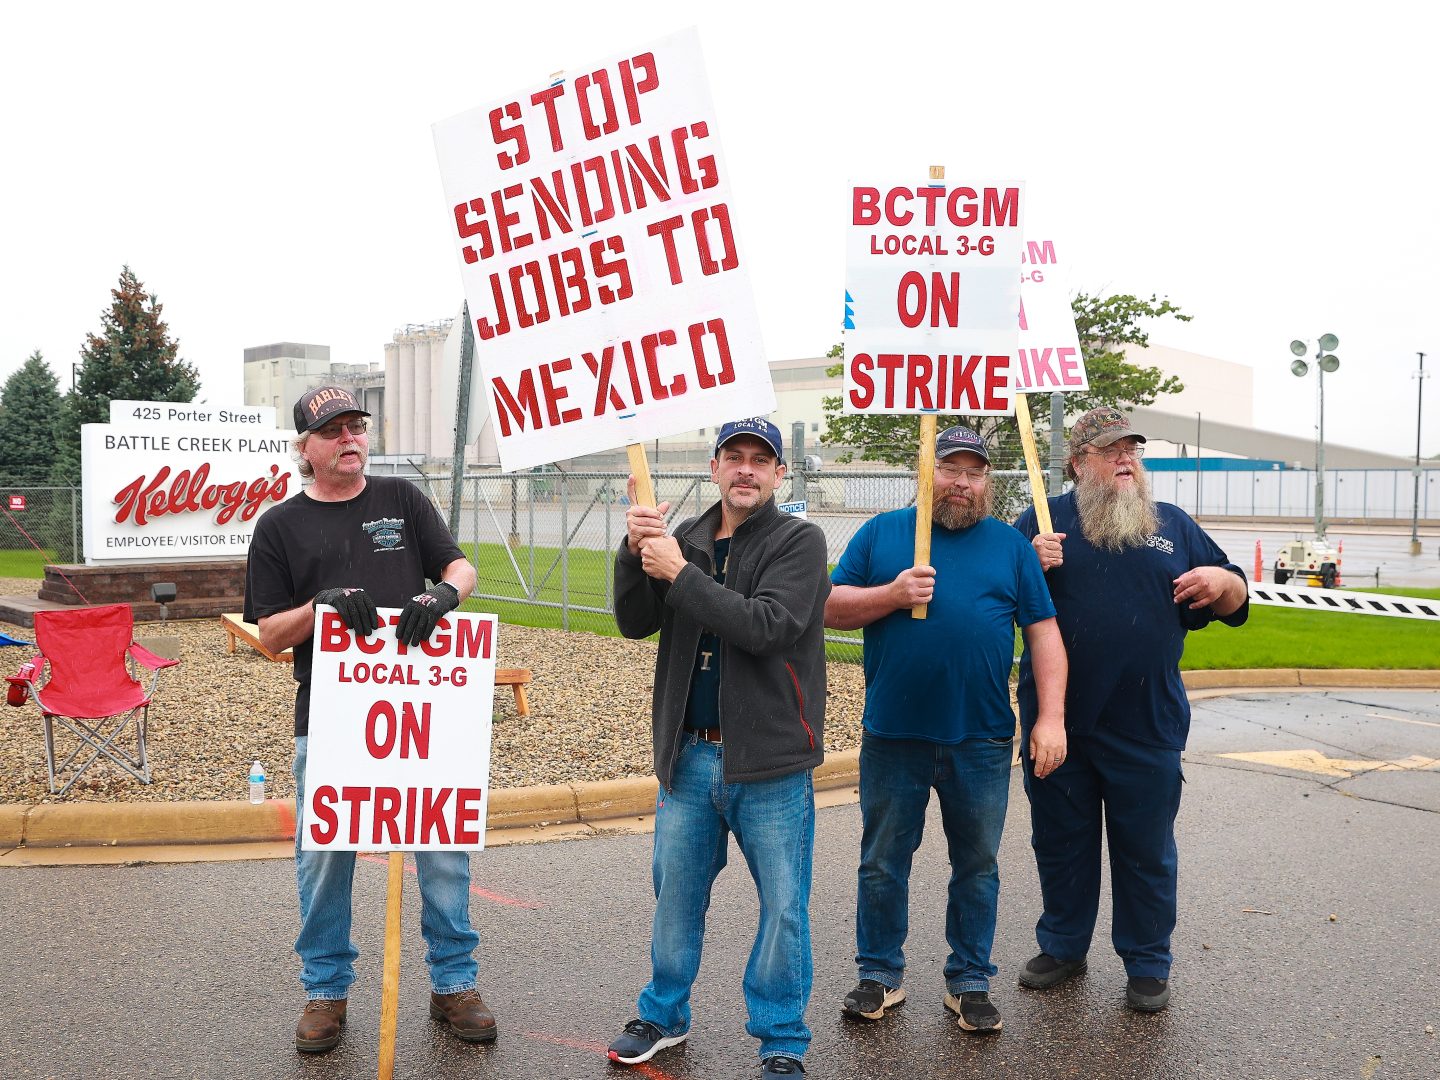 BATTLE CREEK, MI - OCTOBER 07: Kellogg's Cereal plant workers demonstrate in front of the Kellogg's Cereal Plant on October 7, 2021 in Battle Creek, Michigan. (Photo by Rey Del Rio/Getty Images)